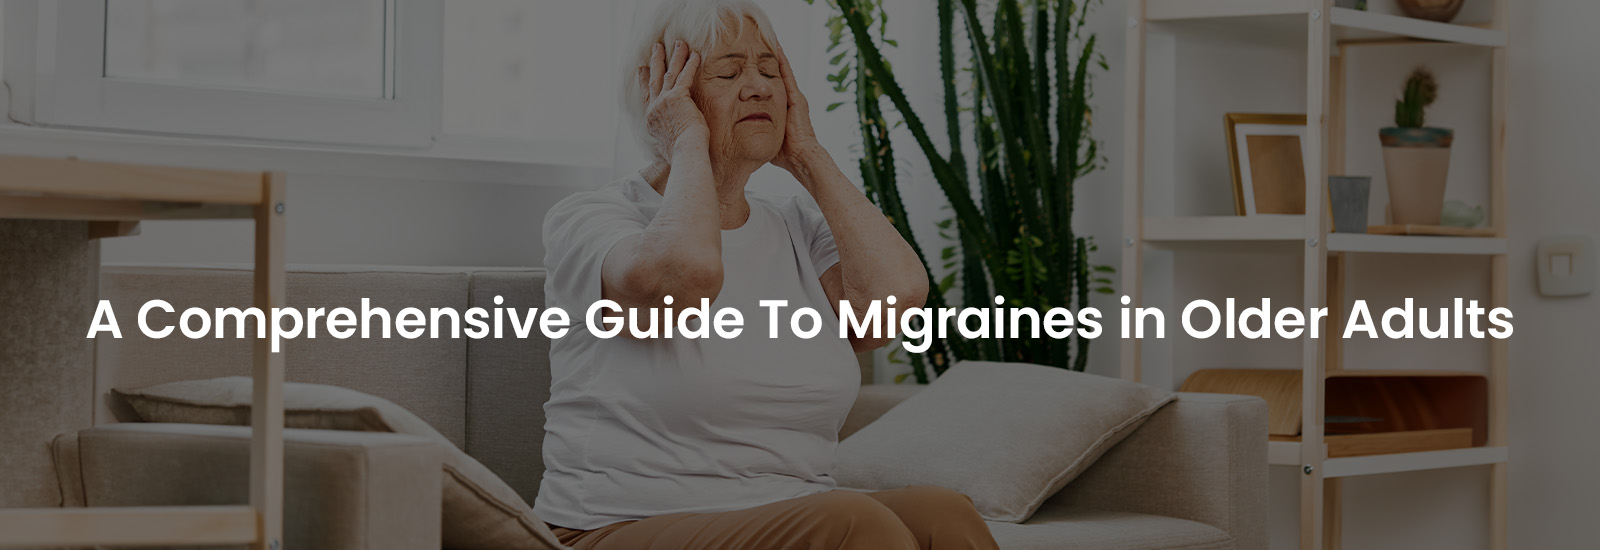 A Comprehensive Guide To Migraines in Older Adults | Banner Image